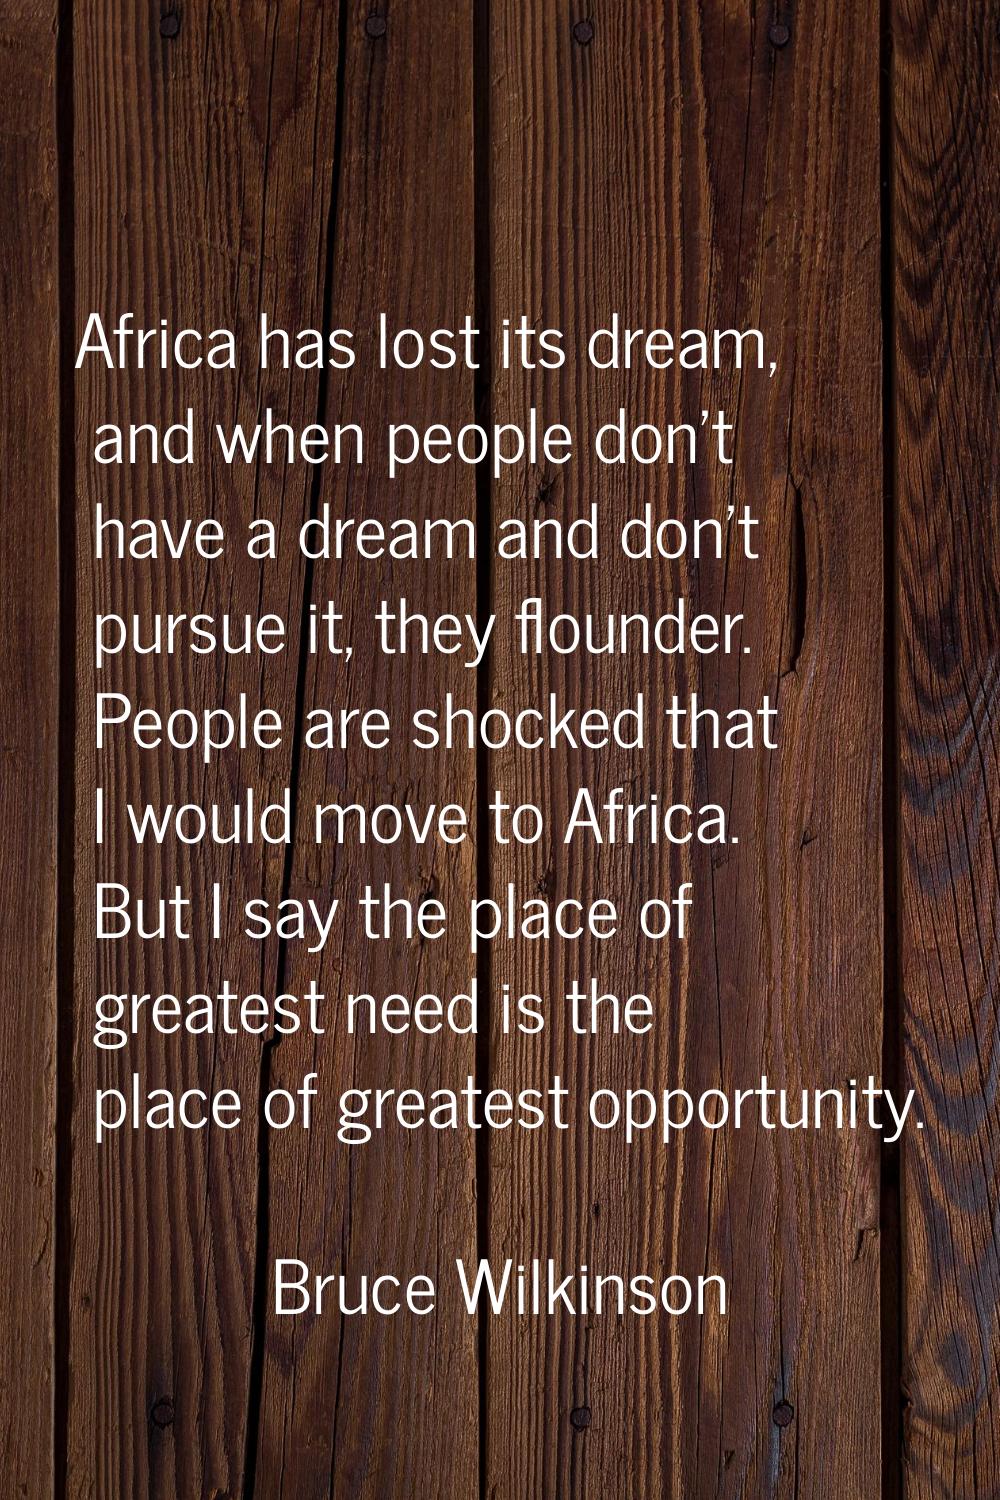 Africa has lost its dream, and when people don't have a dream and don't pursue it, they flounder. P